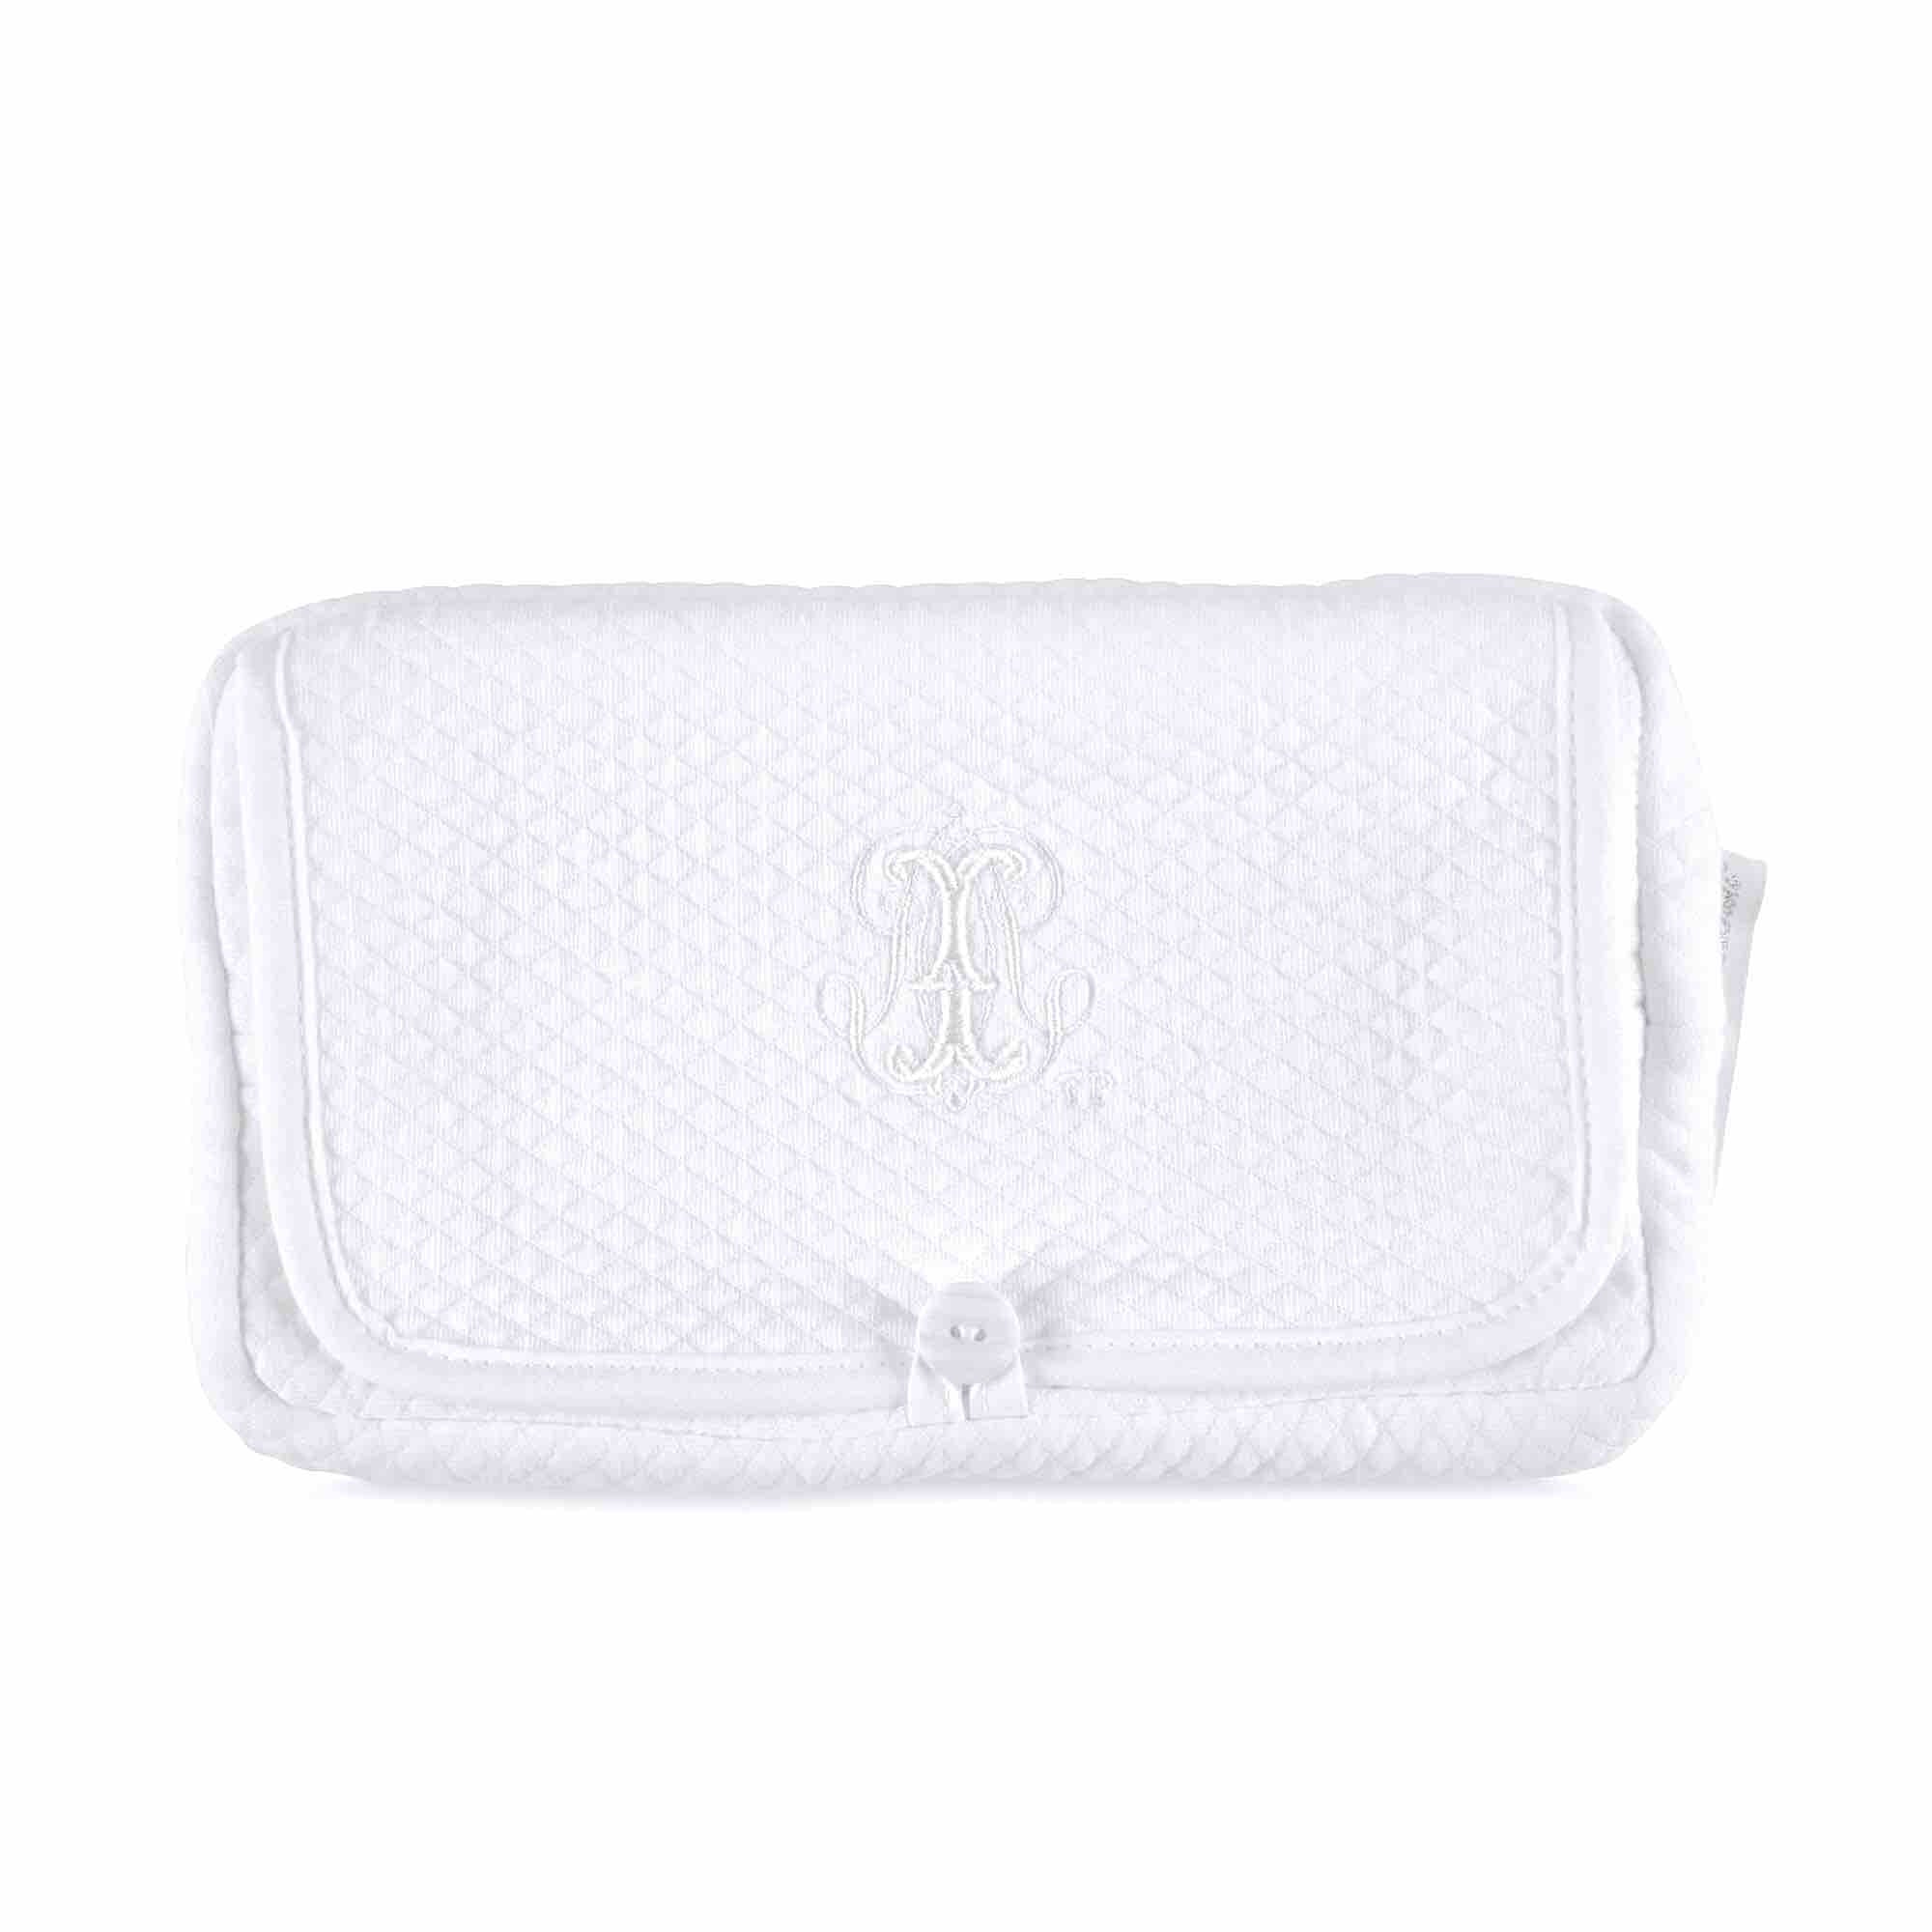 Theophile & Patachou Travel Baby Wipes Cover - Royal White